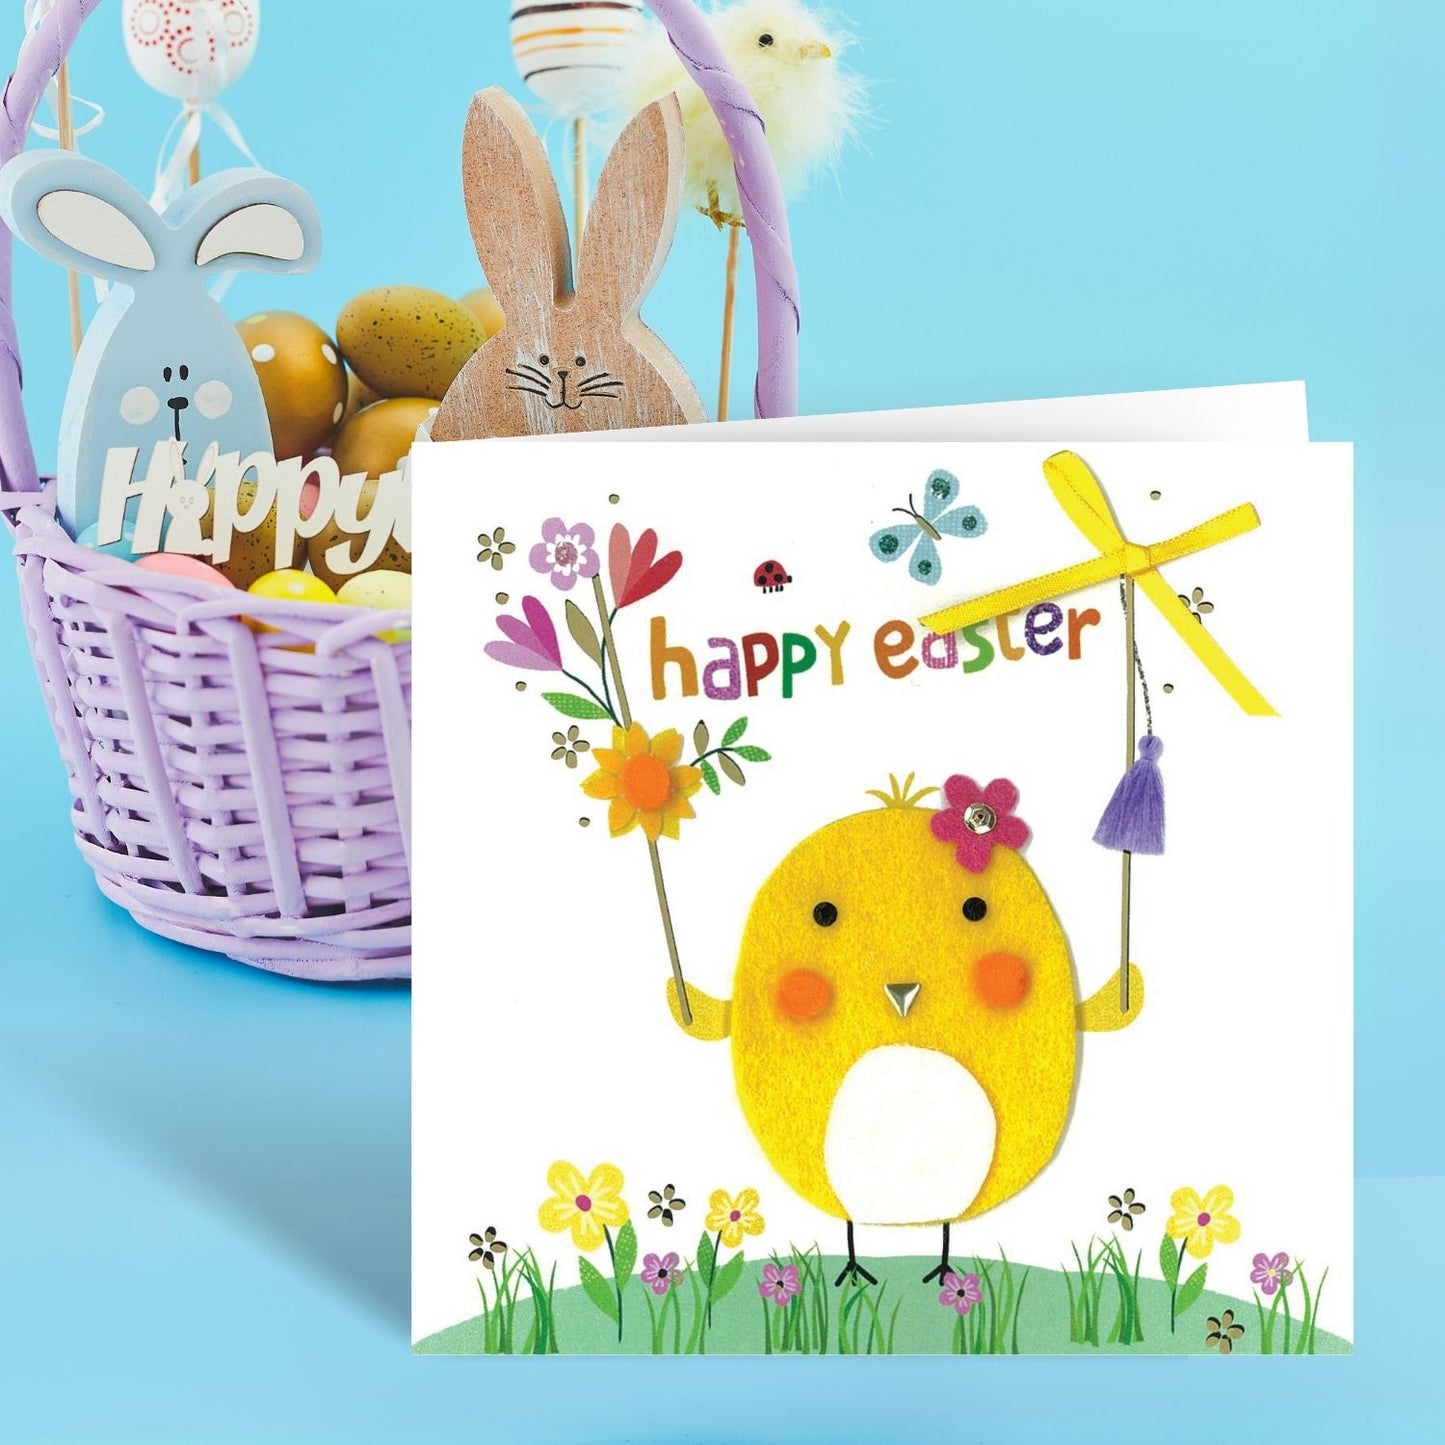 Felt Chick Happy Easter Wishes Hoppy Easter Fun Hand-Finished Greeting Card